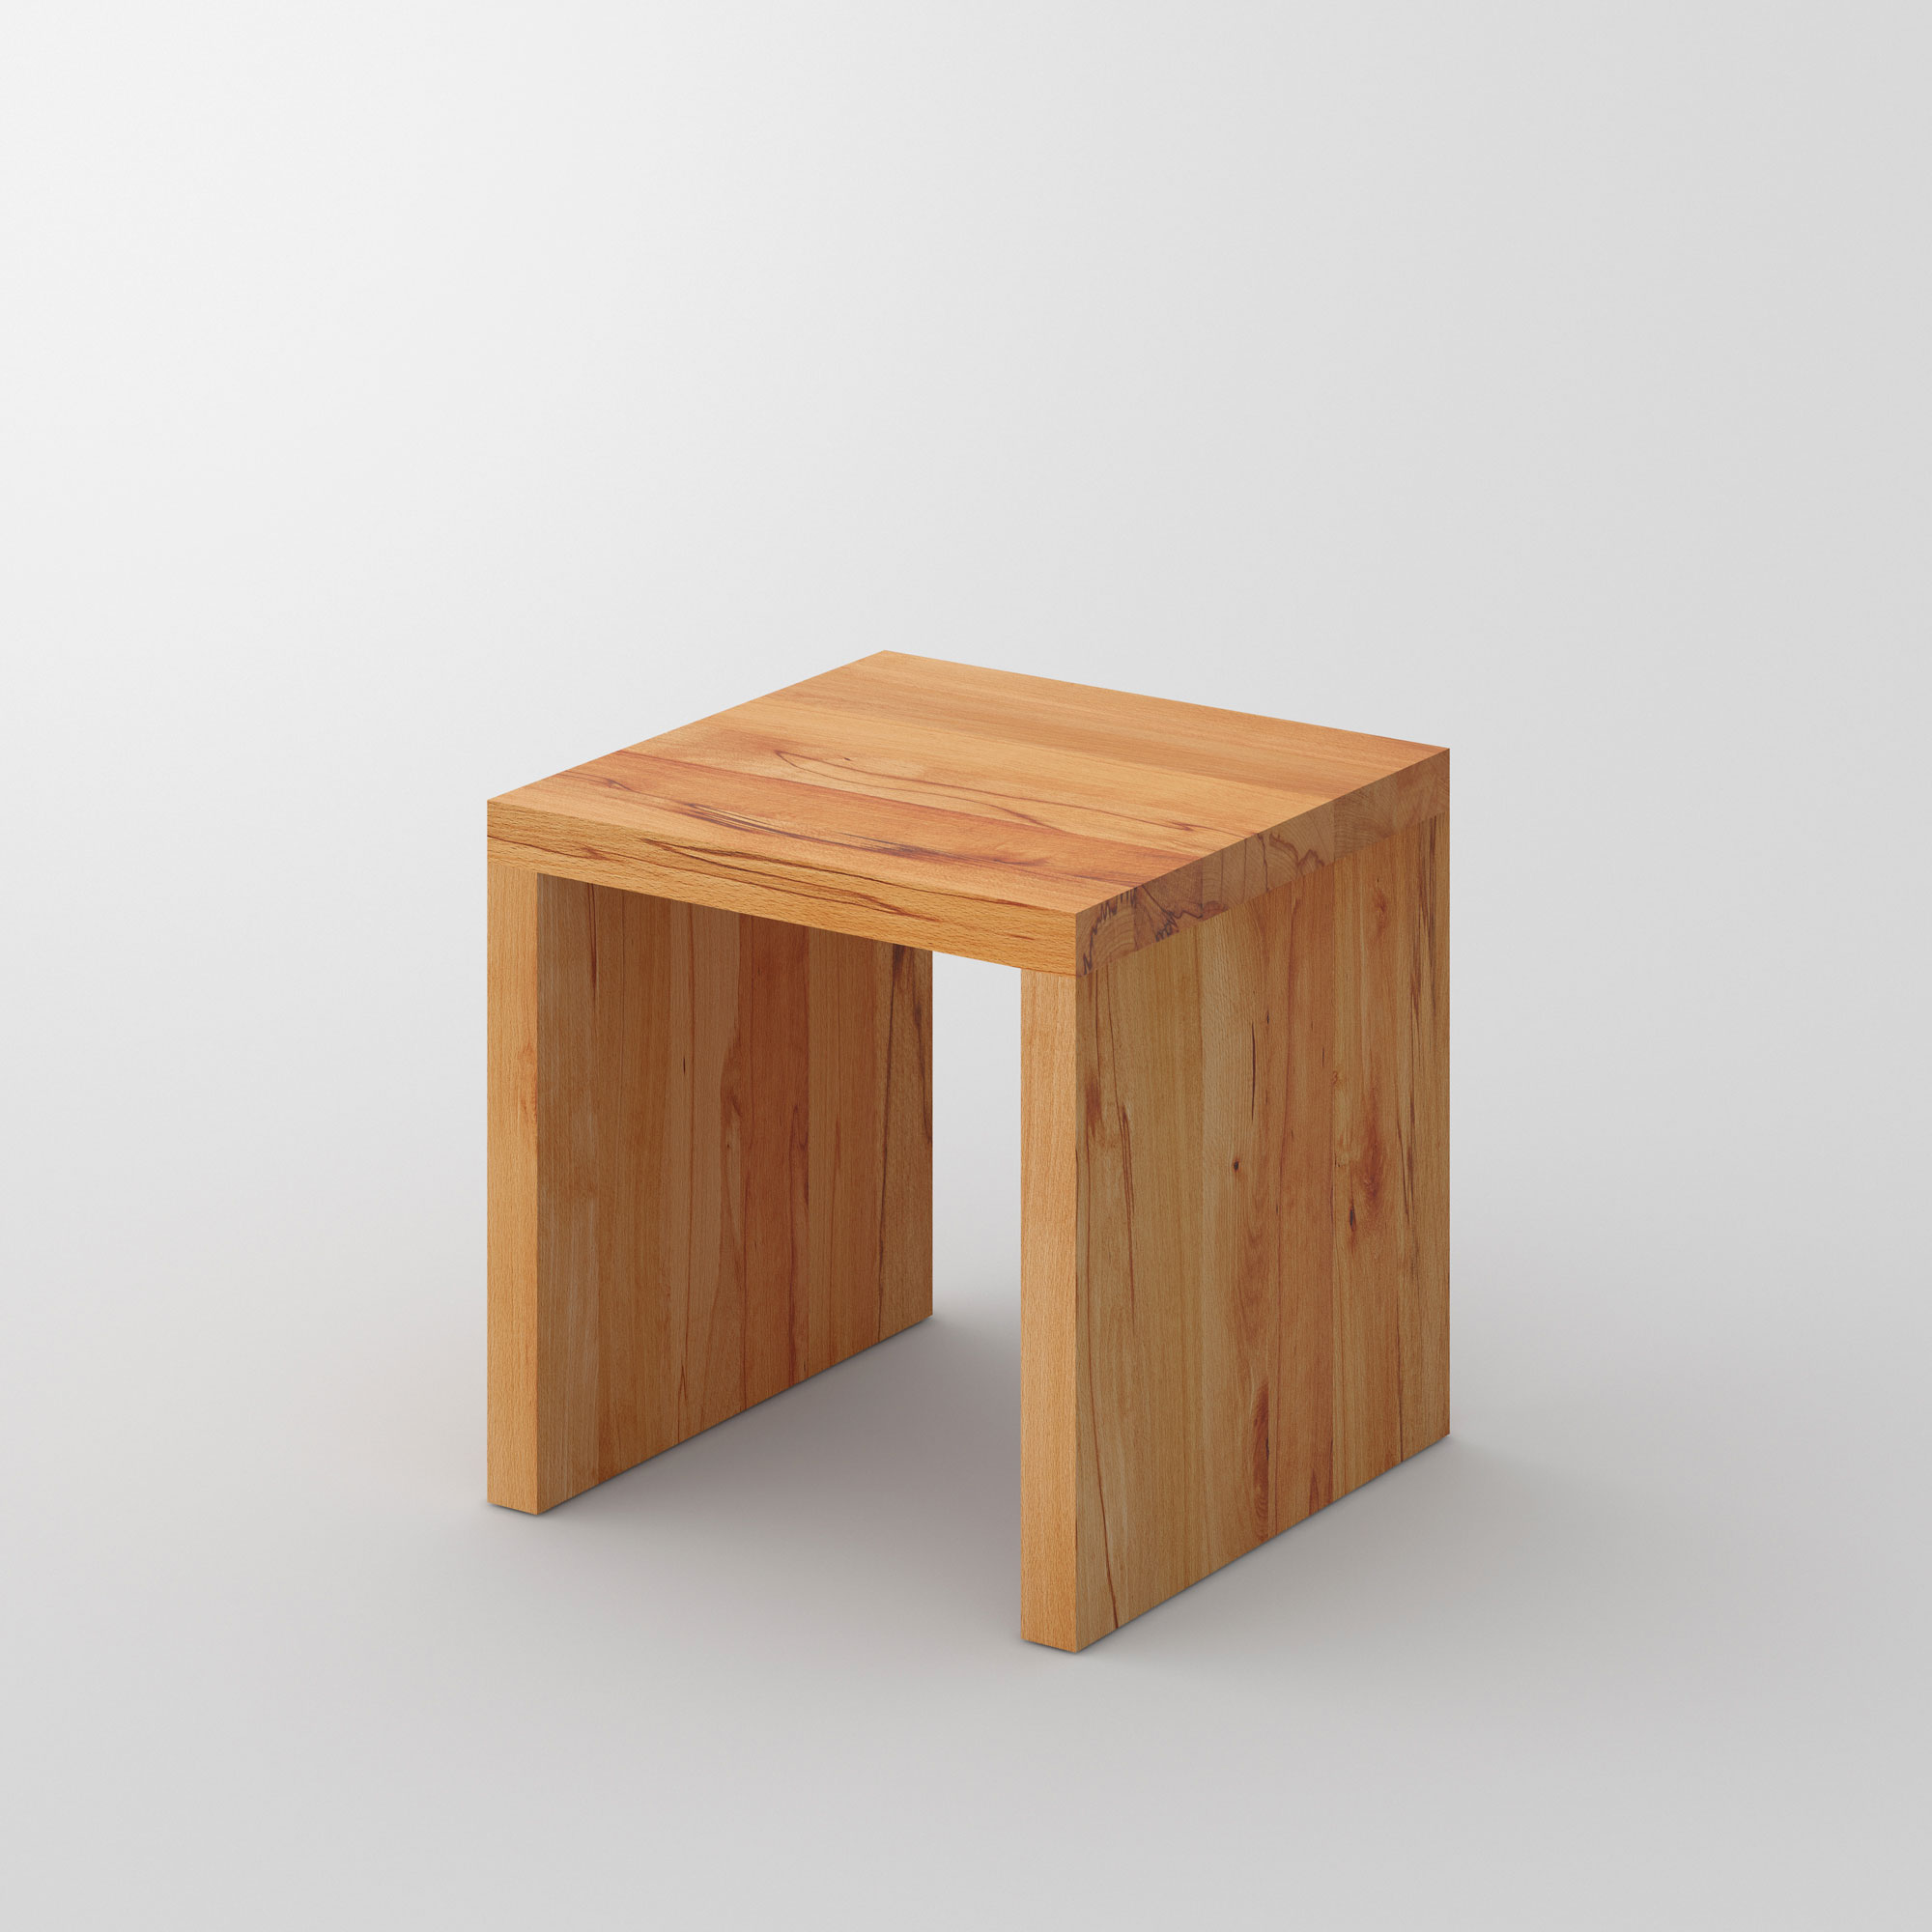 Multifunctional Solid Wood Stool MENA 4 cam1 custom made in solid wood by vitamin design